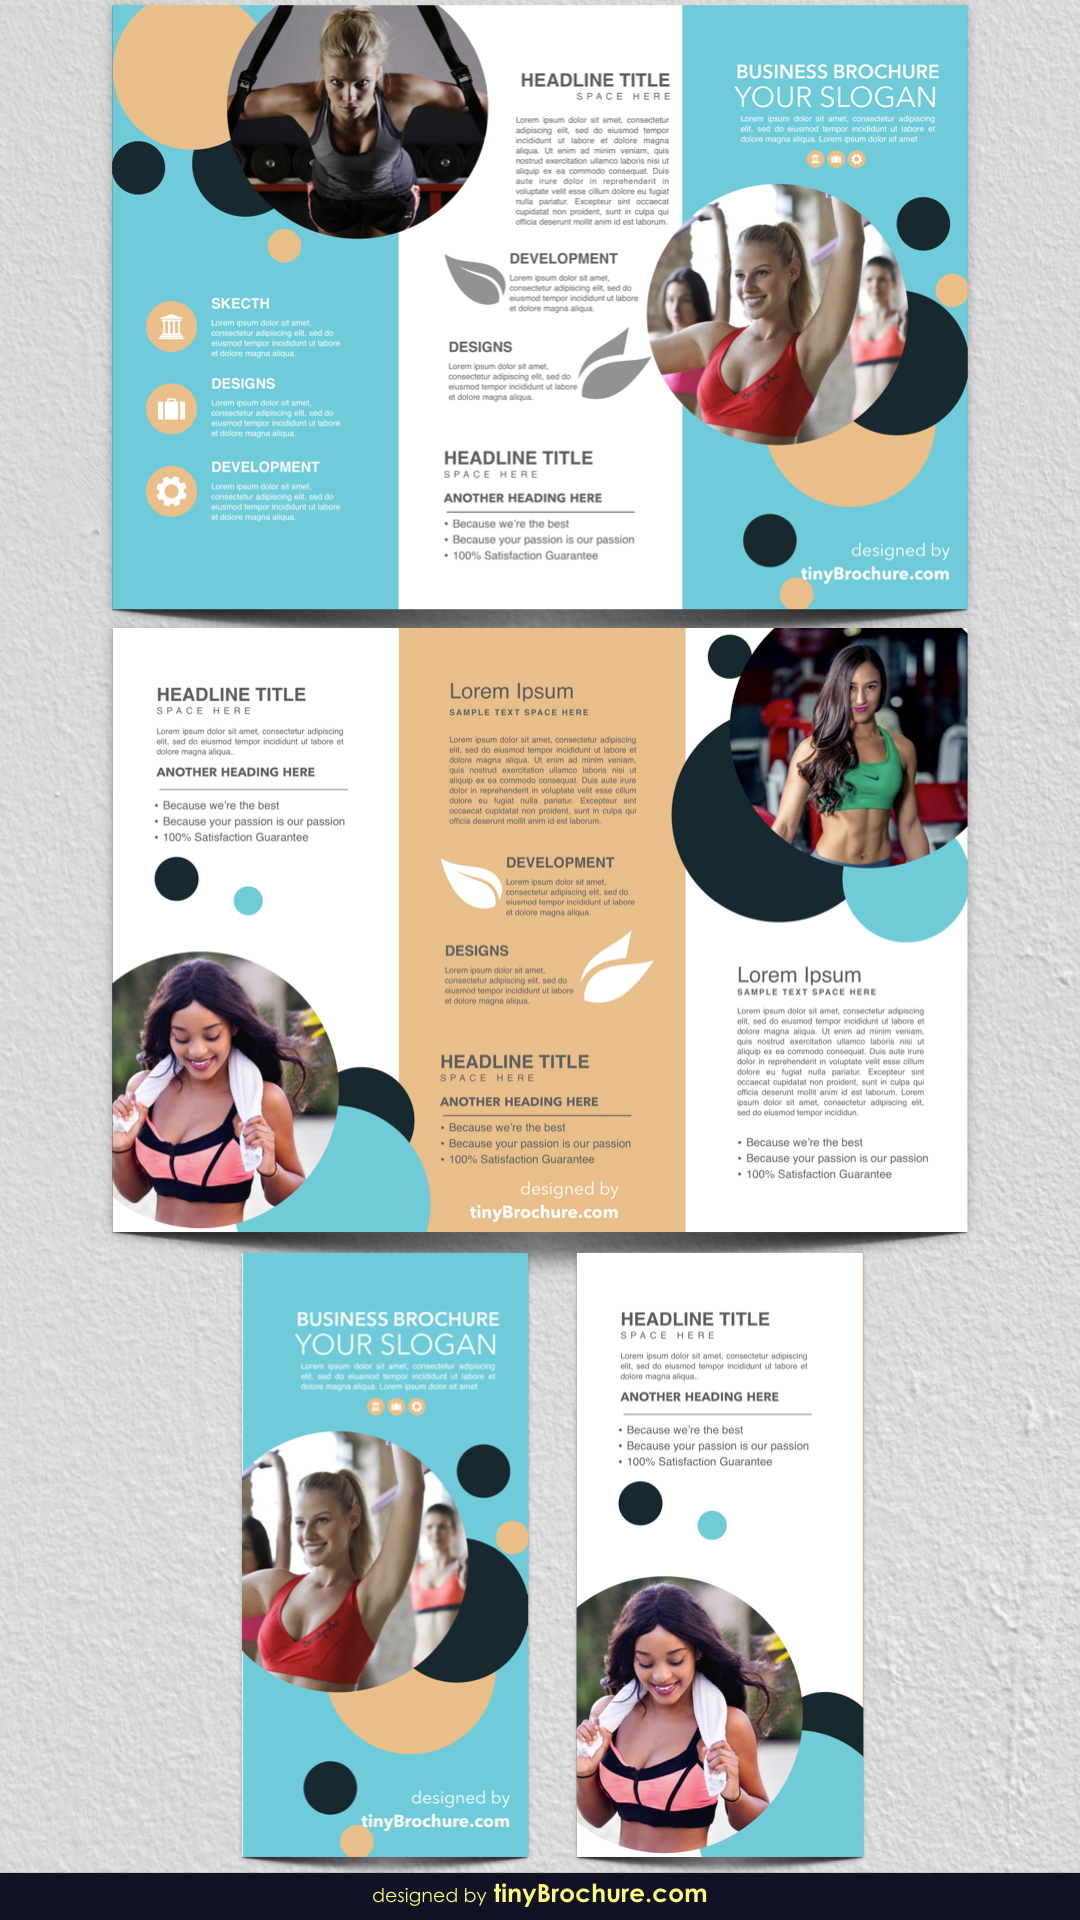 How To Make A Brochure On Microsoft Word 2007 | Graphic With Regard To Booklet Template Microsoft Word 2007